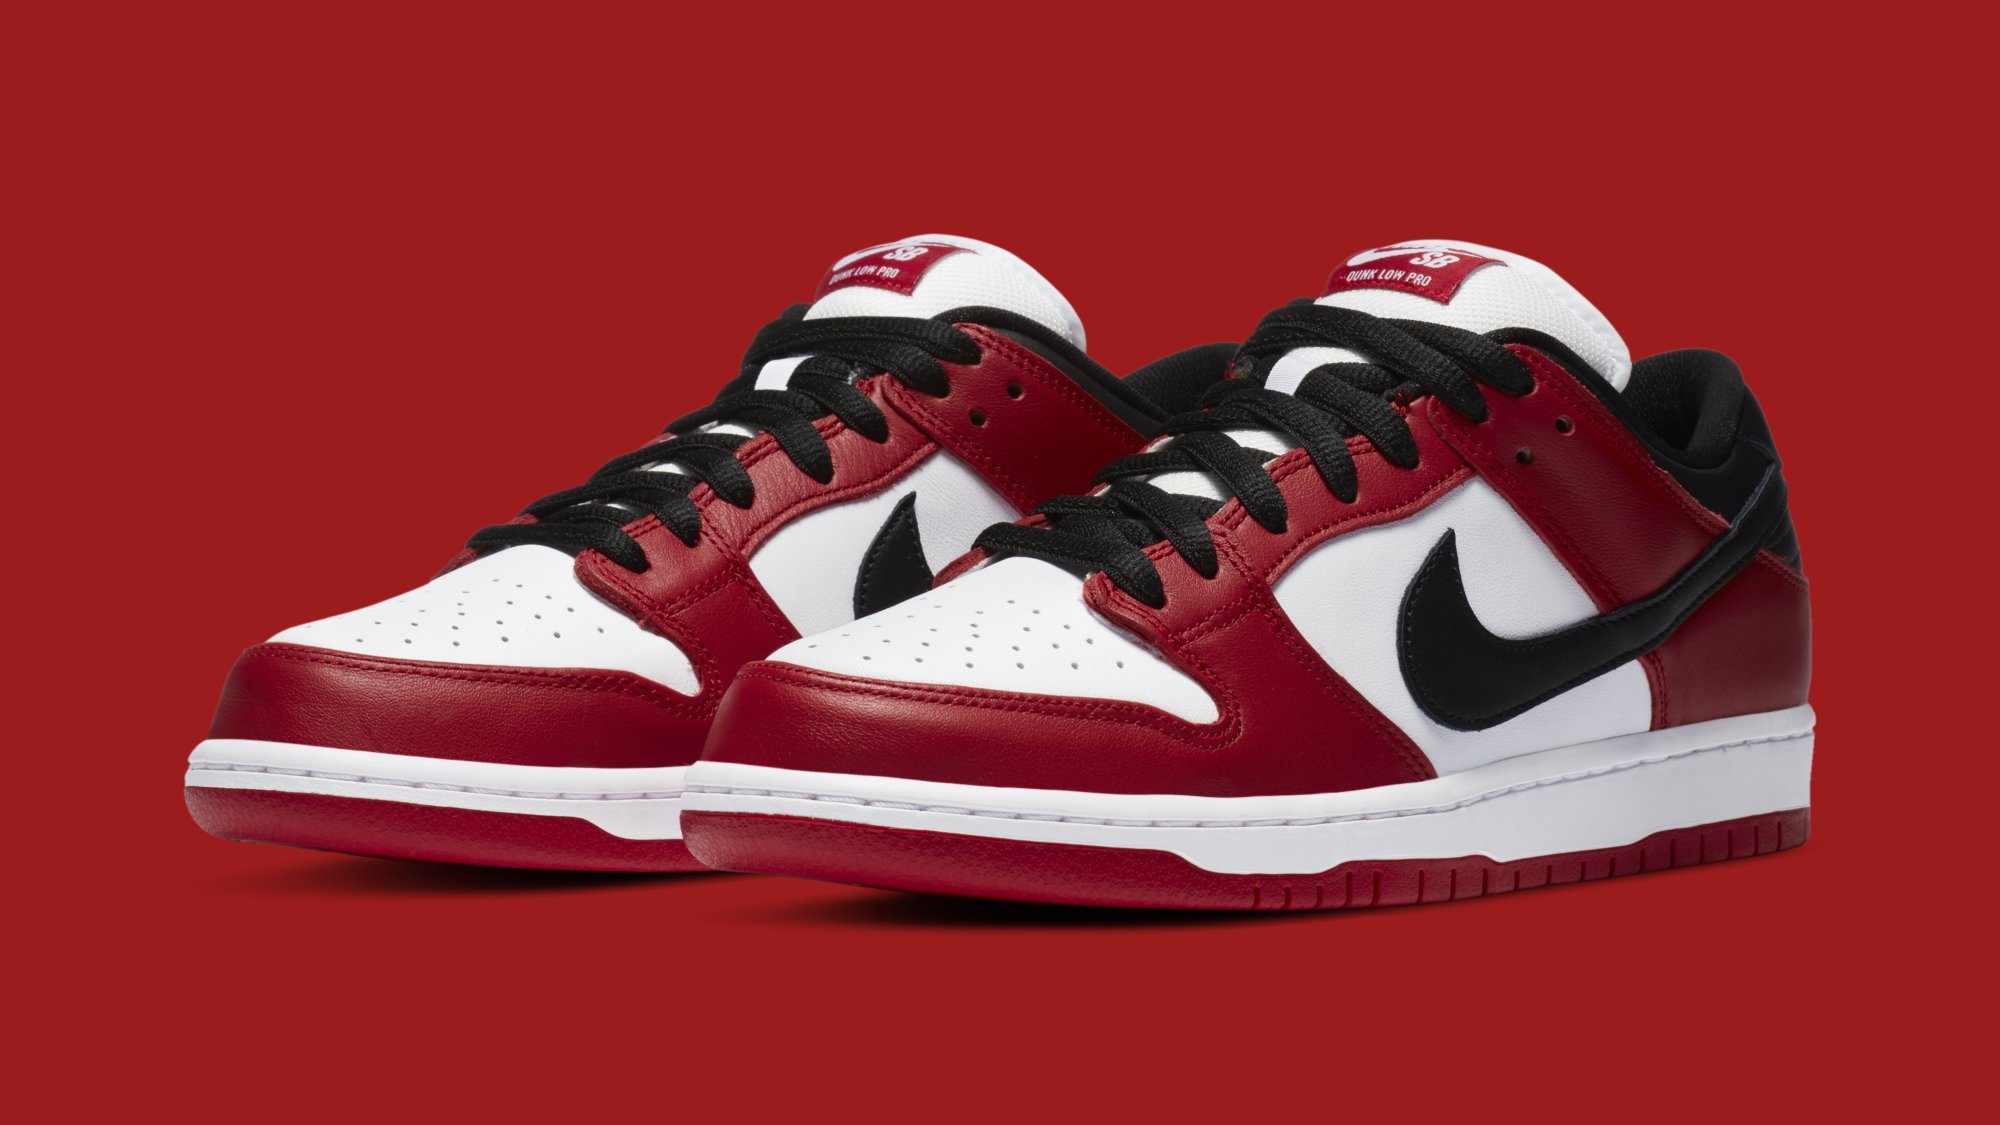 Chicago' Nike SB Dunk Lows Are Finally Releasing in the States